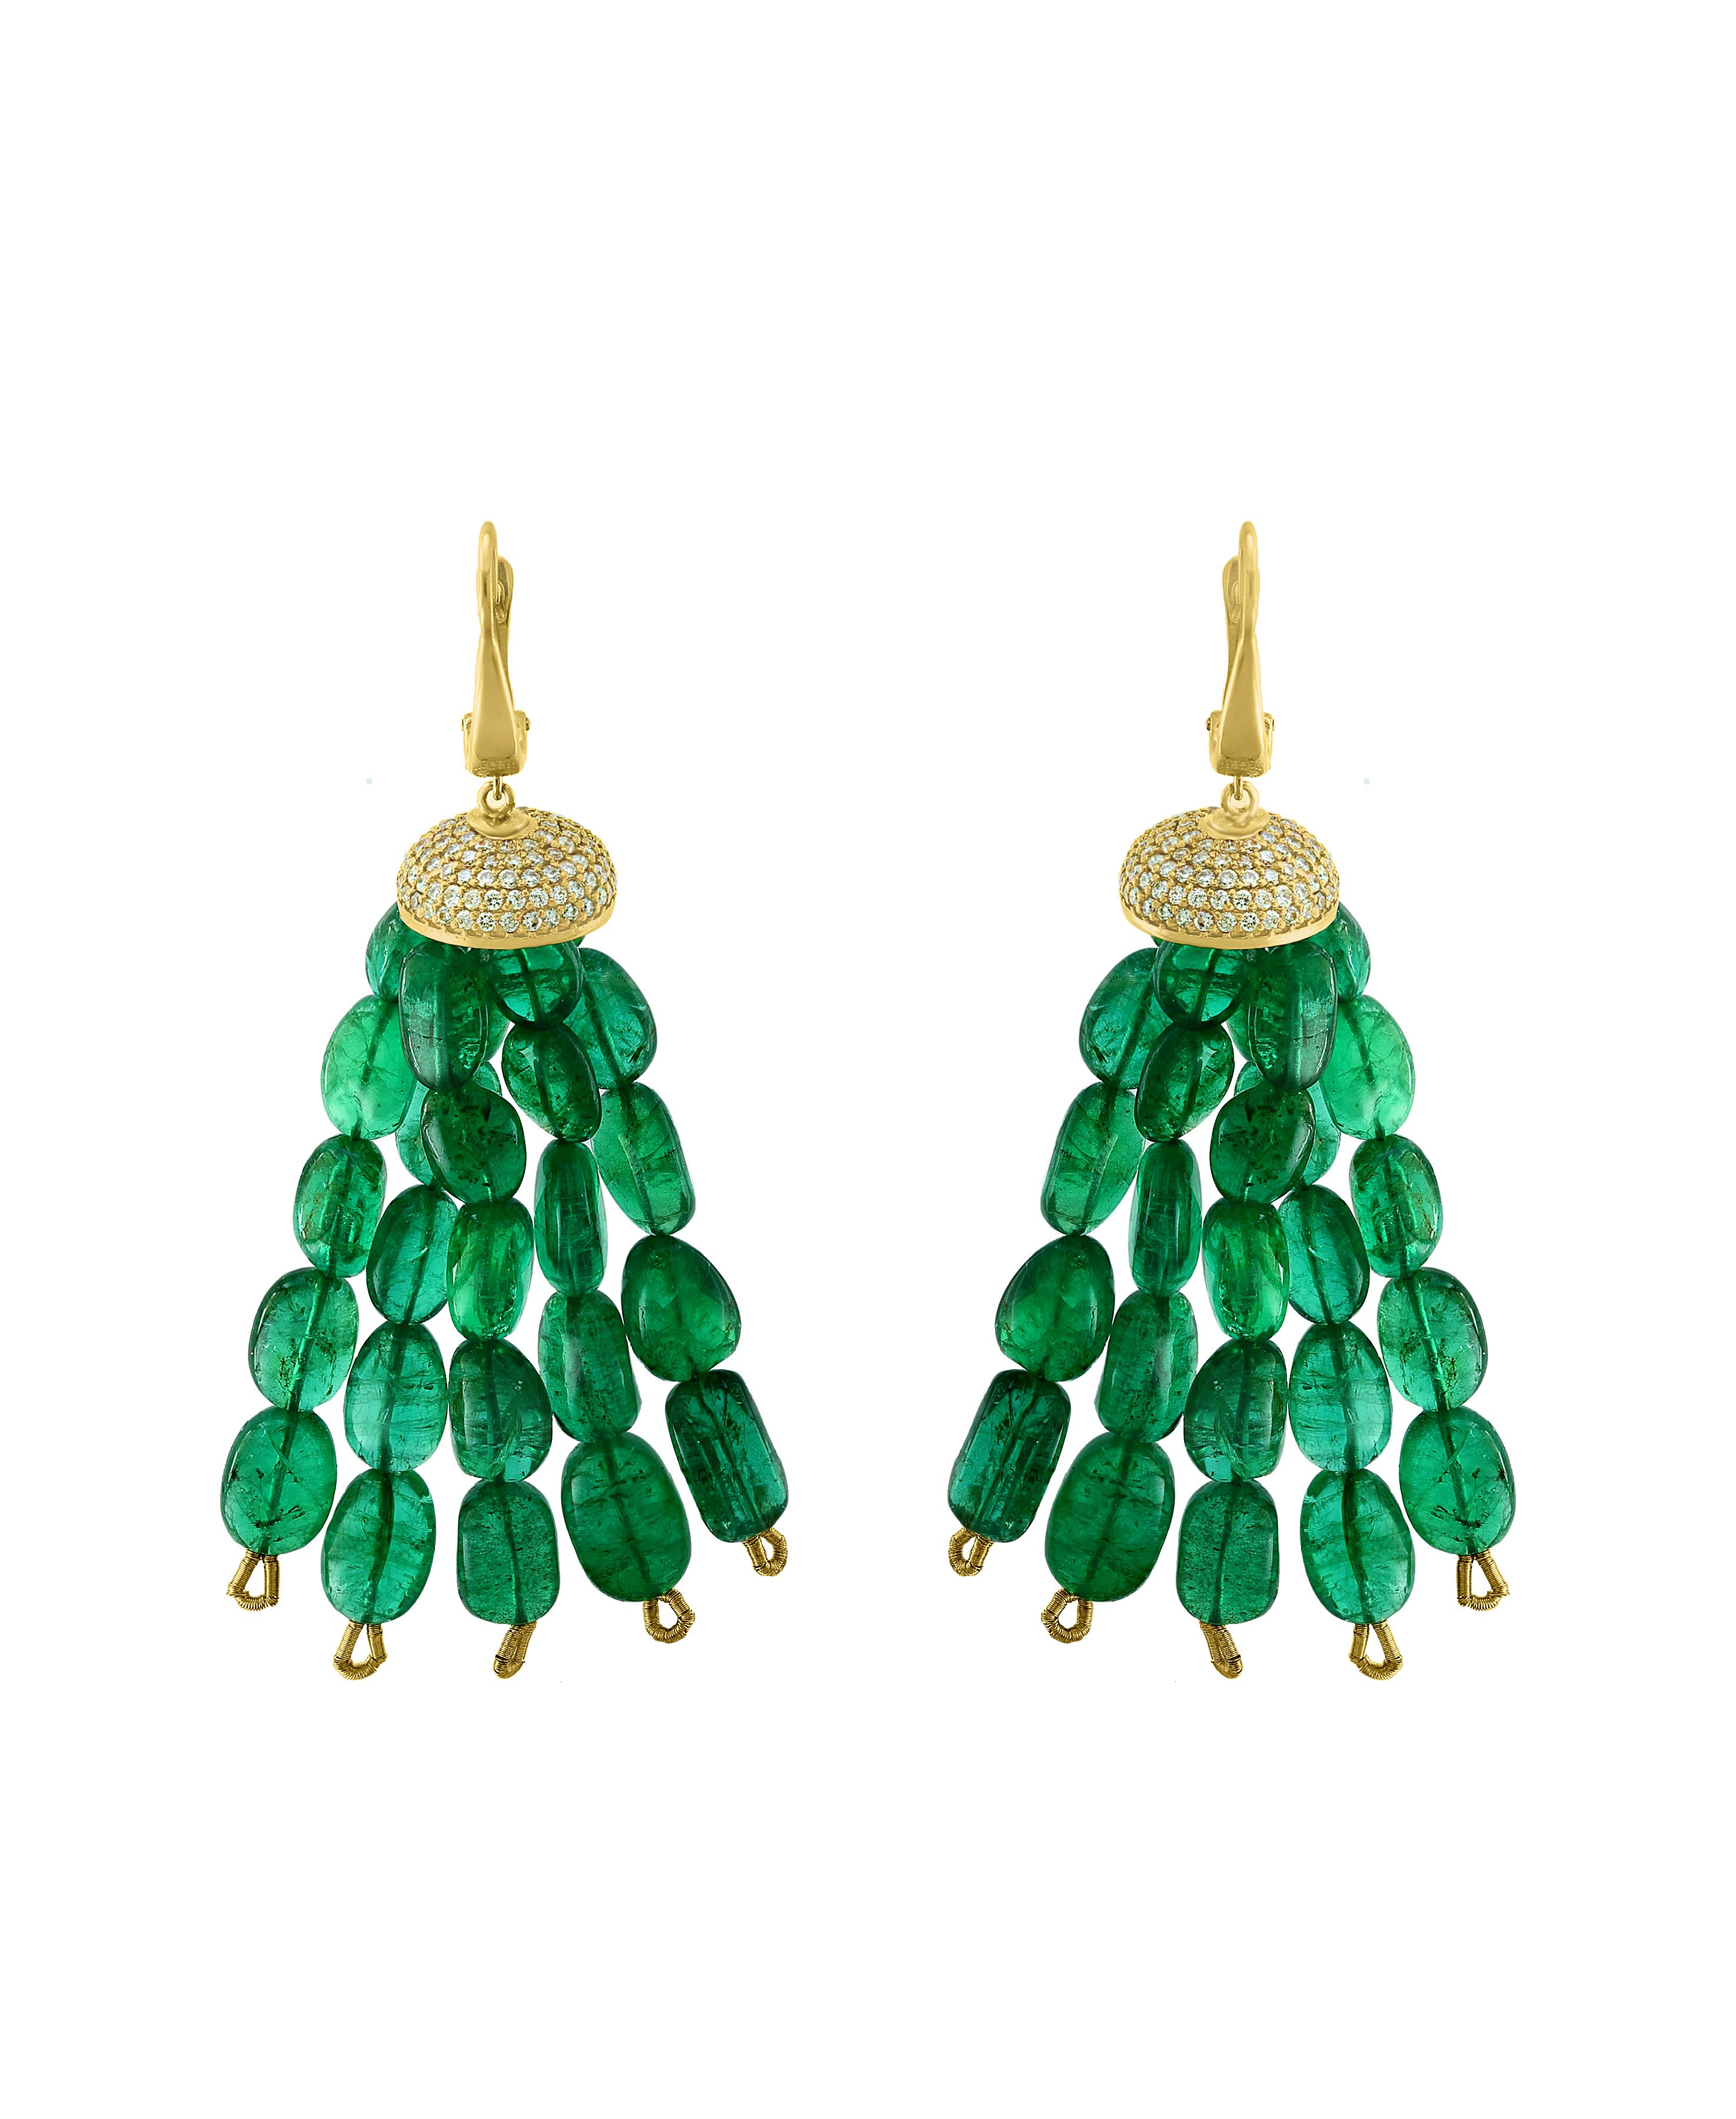 150 Carats Emerald Beads & Diamond  Hanging Earrings  14 K Gold 
This exquisite pair of earrings are beautifully crafted with 14 karat yellow gold  
150 Carats of  fine emerald beads are  hanging  from a beautiful cap surrounded by  brilliant round